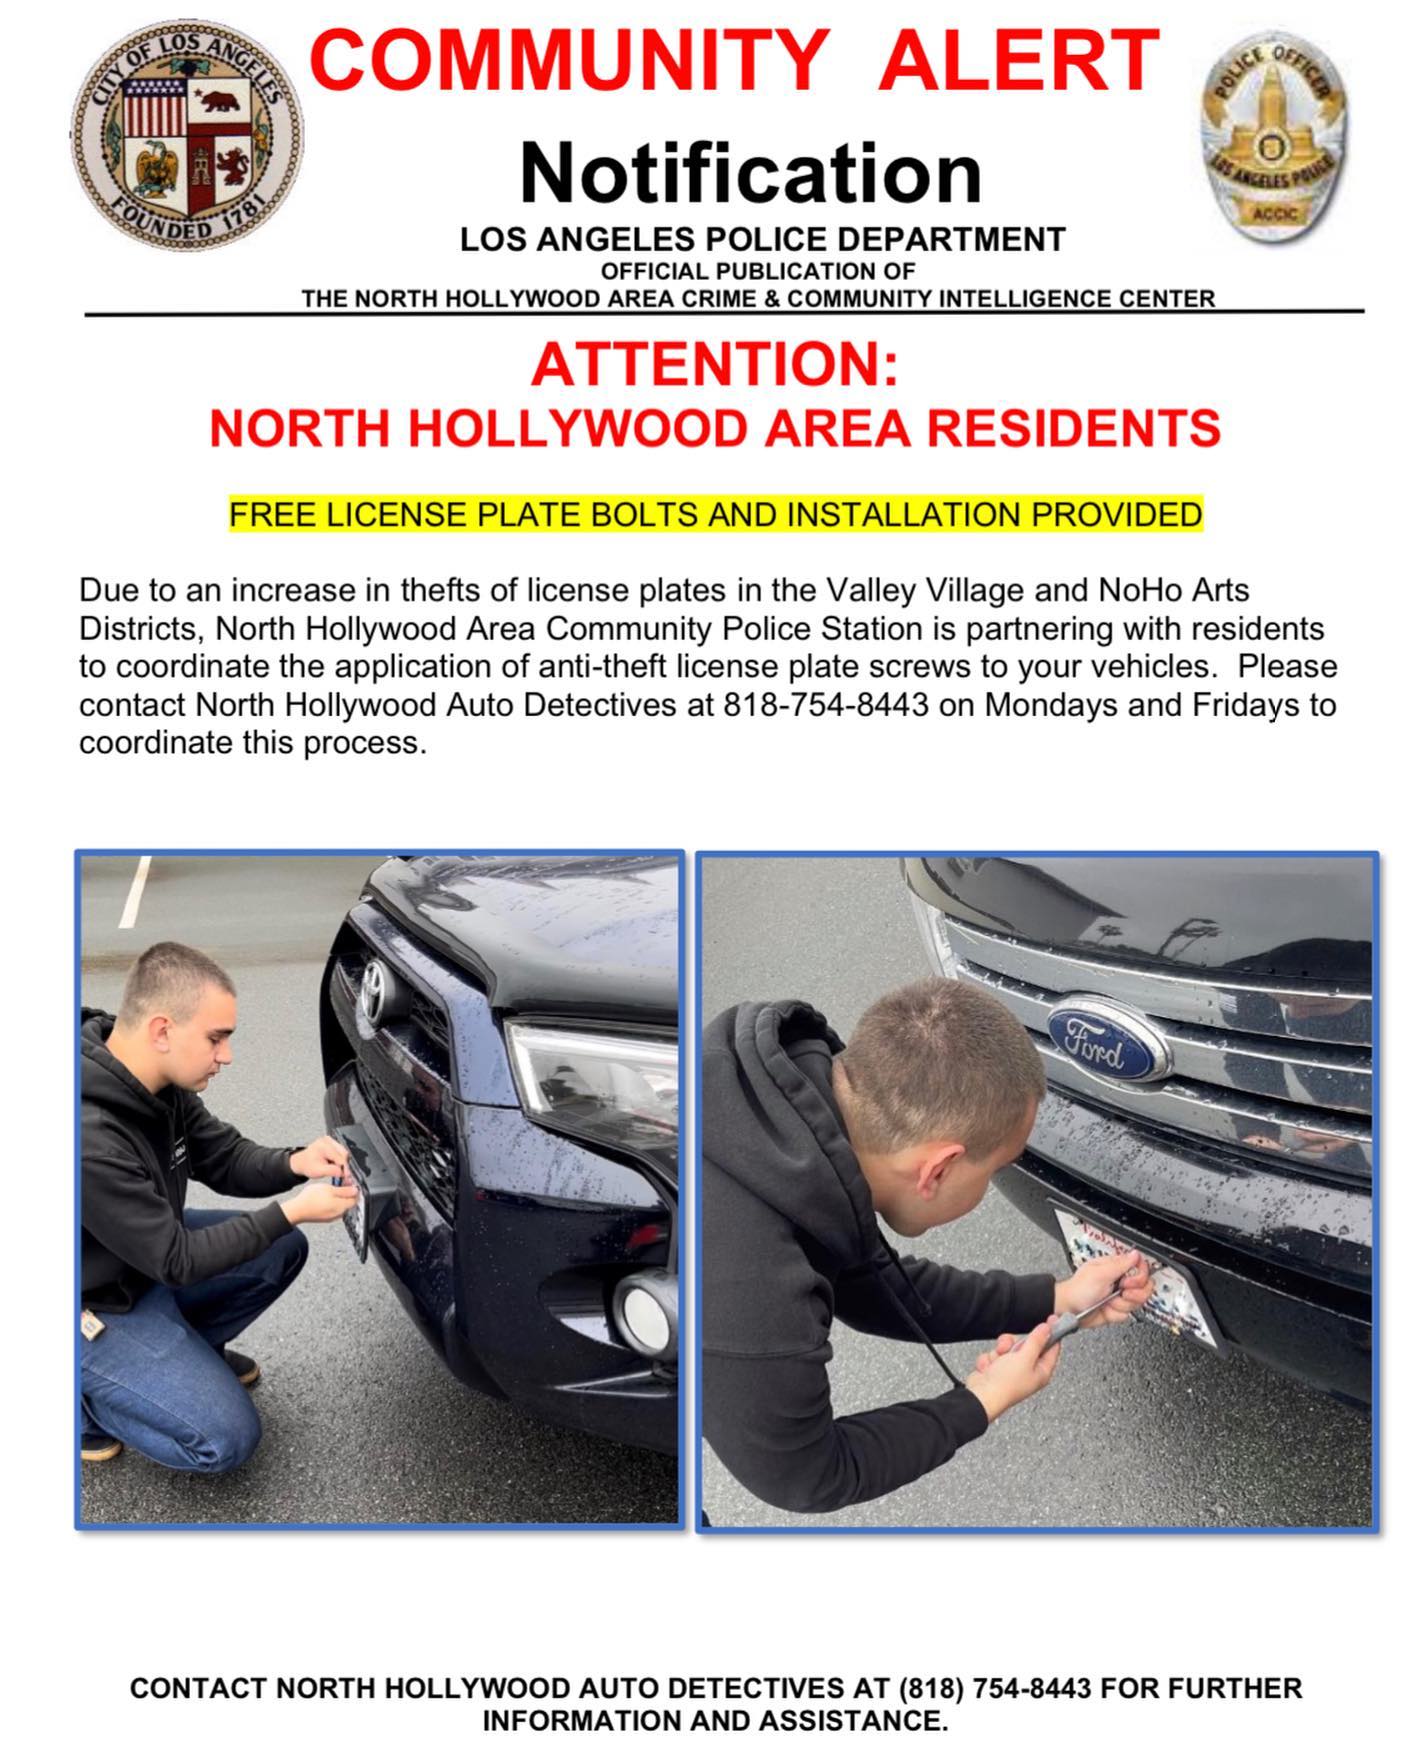 Due to an increase in license plate thefts, NH LAPD is encouraging the community to attend.  To book an appointment, contact Auto Detectives at 818-754-8443.